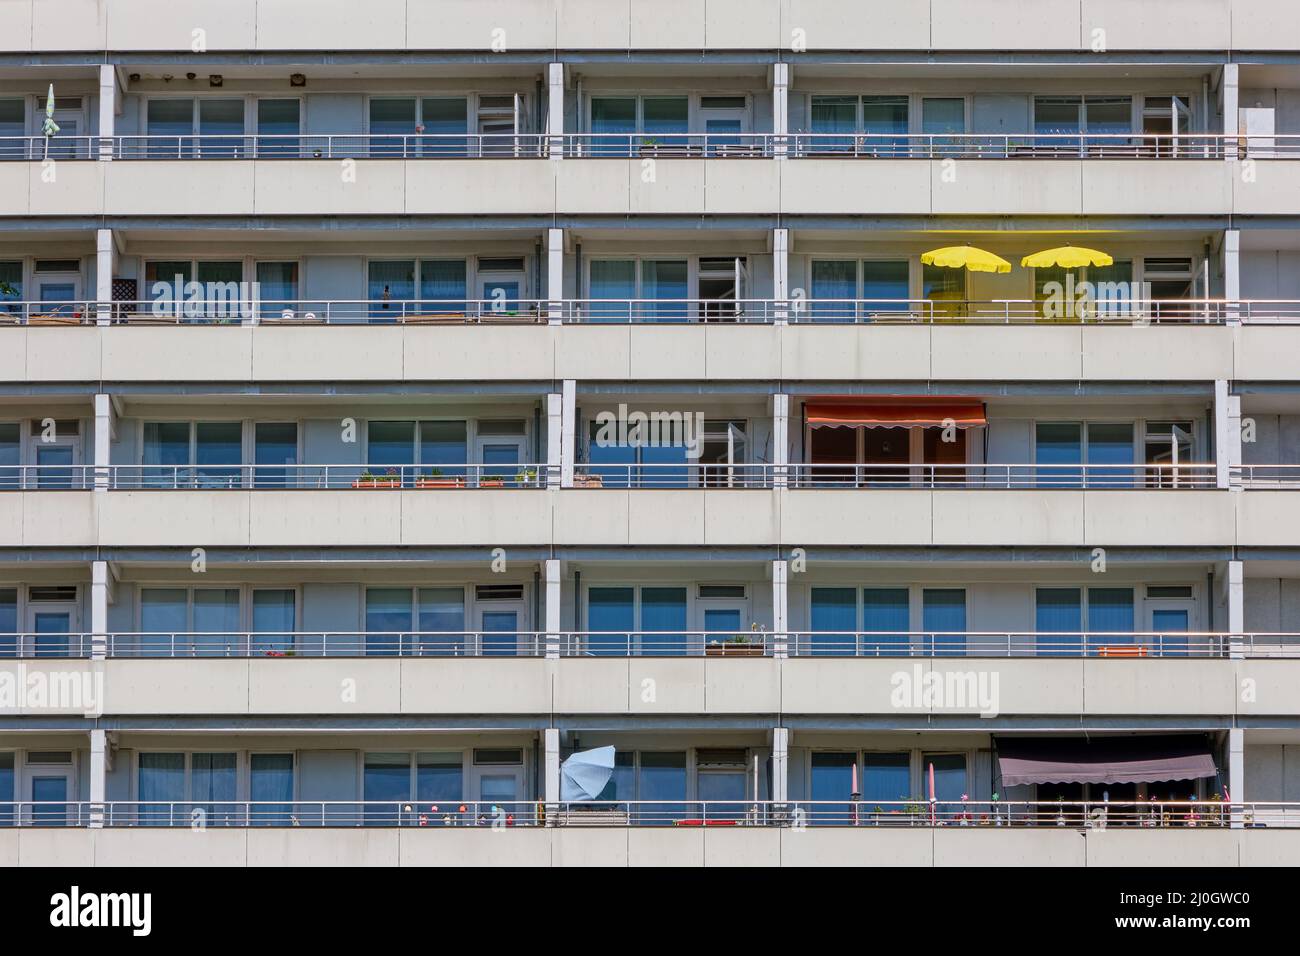 Facade of a big apartment building with yellow sunshades on one of the balconies Stock Photo